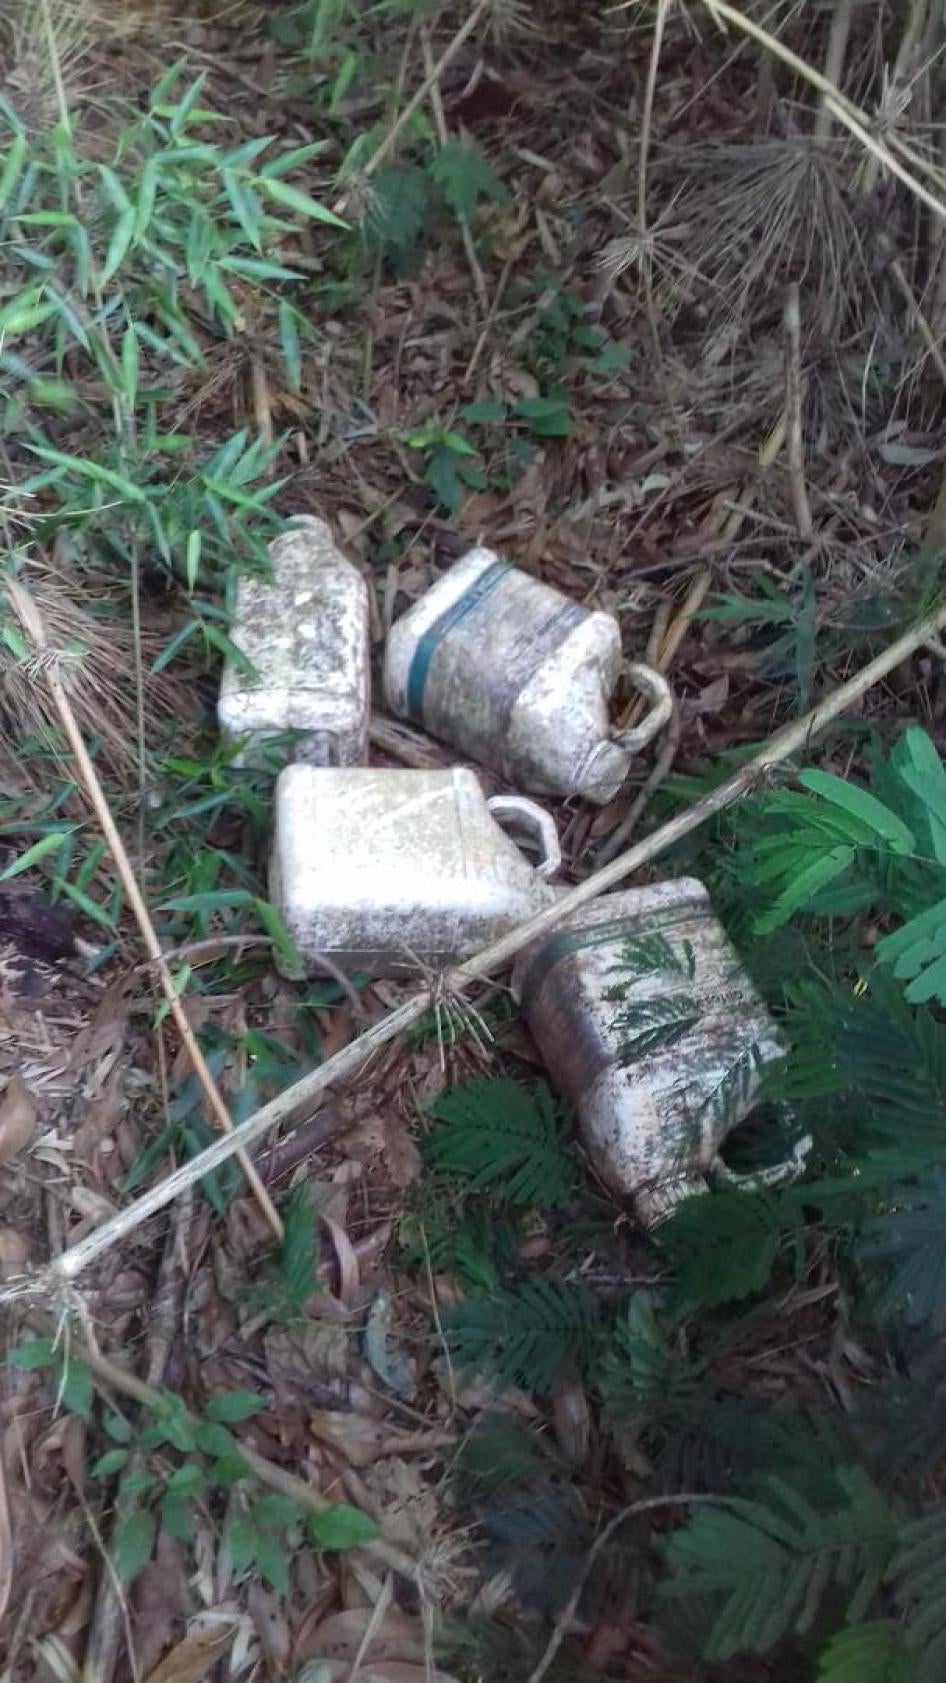 Discarded pesticide containers in Brazil.